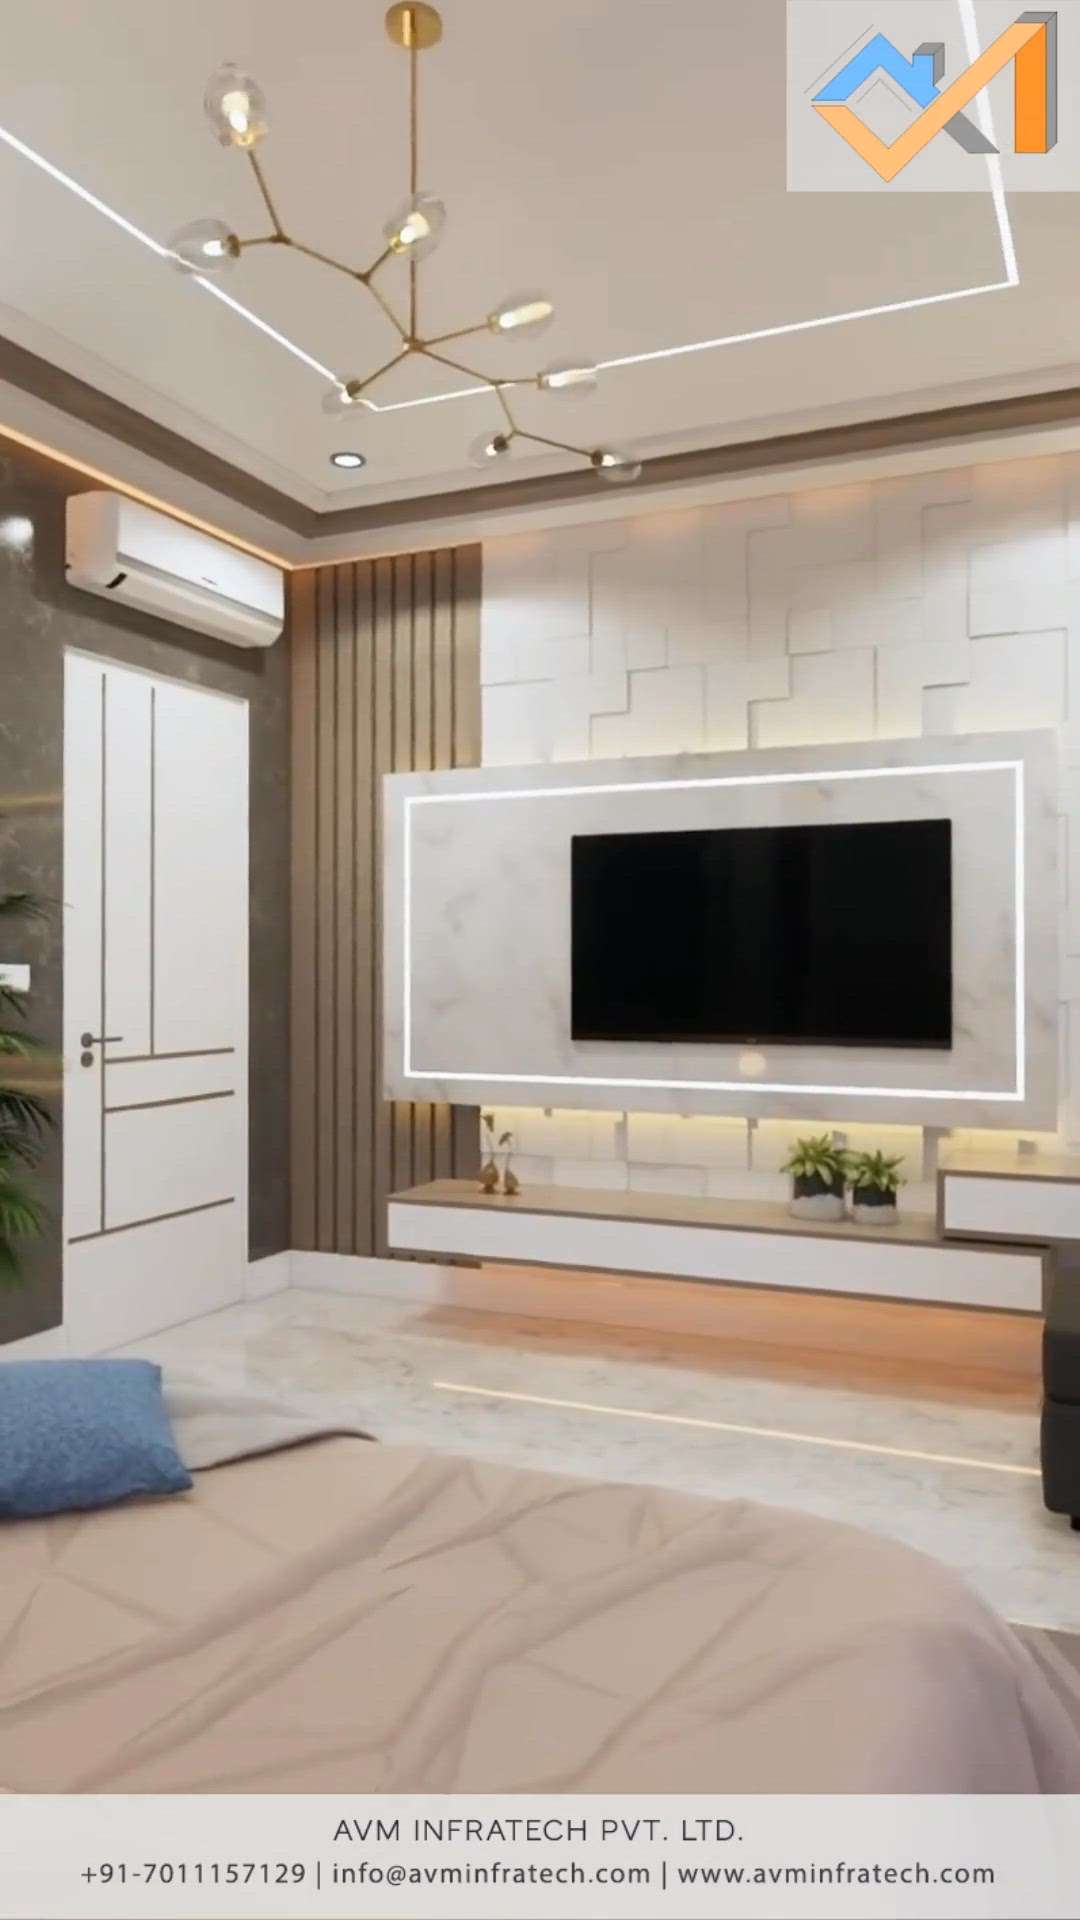 TV panel along with your dressing will surely make a sense if designed well.


Follow us for more such amazing updates. 
.
.
#tv #tvshow #tvseries #tvpaint #tvpanel #tvpaneldesign #tvpanels #design #designdeinteriores #interiordesign #homedesign #designinspo #designinspiration #furnituredesign #avminfratech #dressing #dressingtable